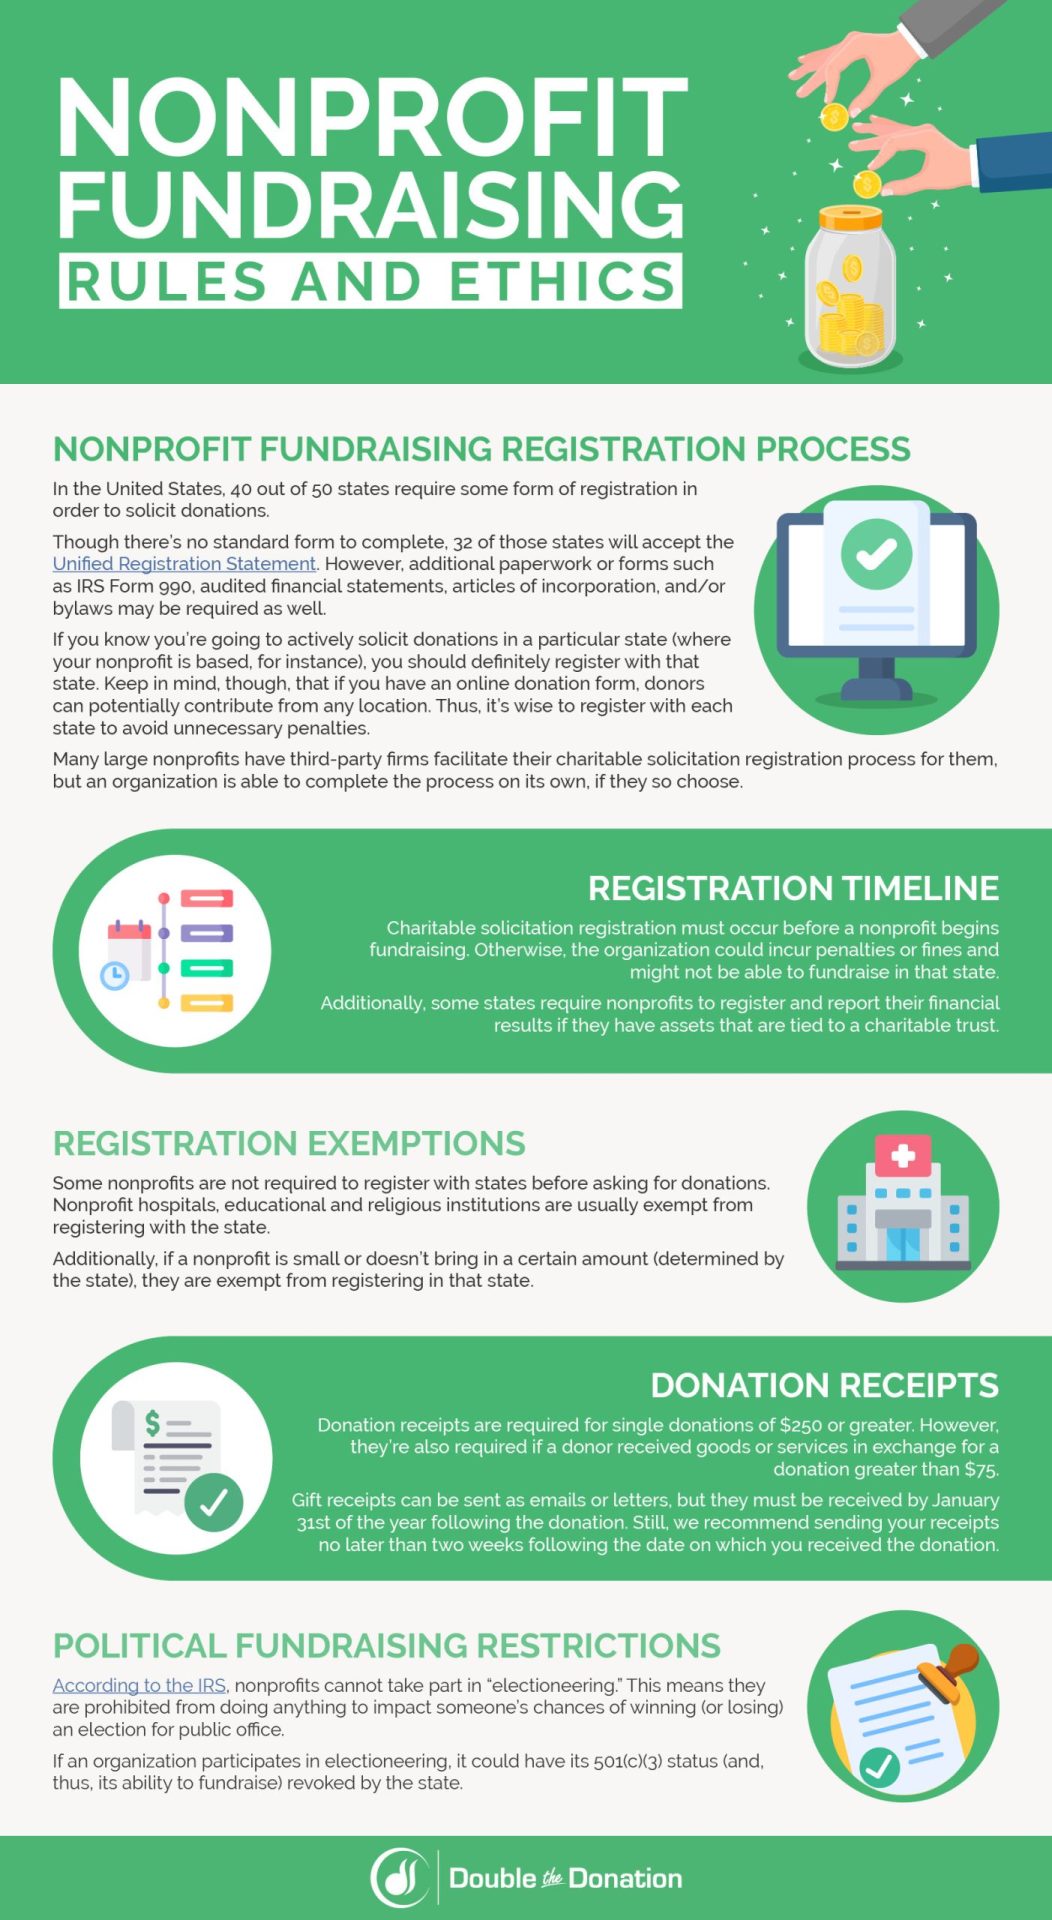 The ethics of nonprofit fundraising are explained and outlined below,